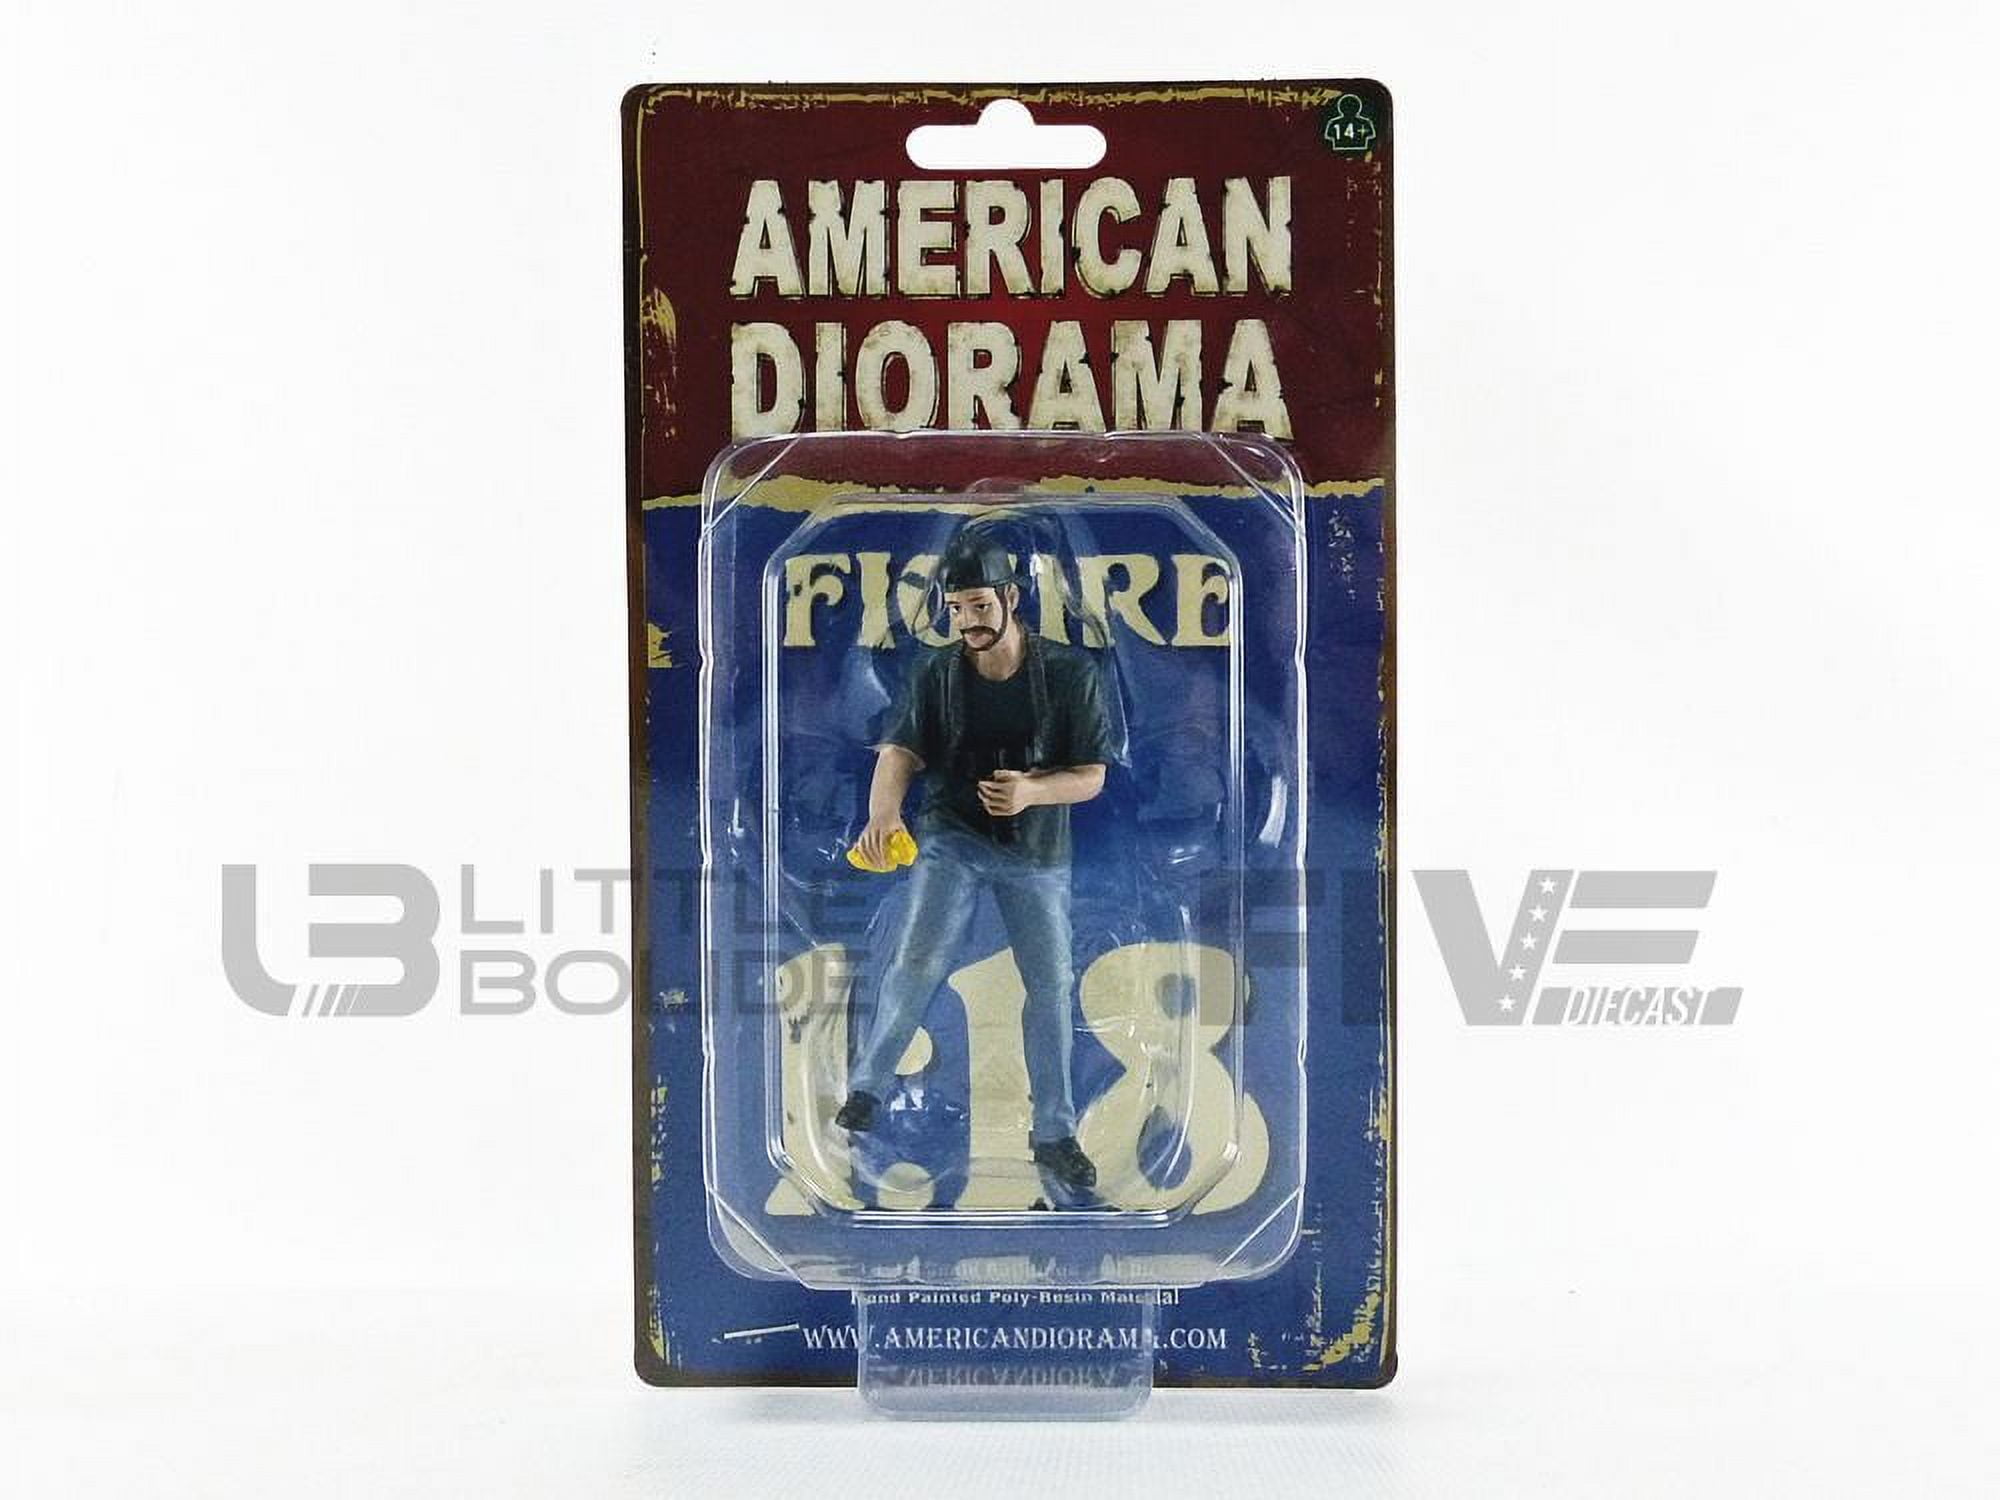 Picture of American Diorama 38215 Weekend Car Show Figurine VII for 1 by 18 Scale Models